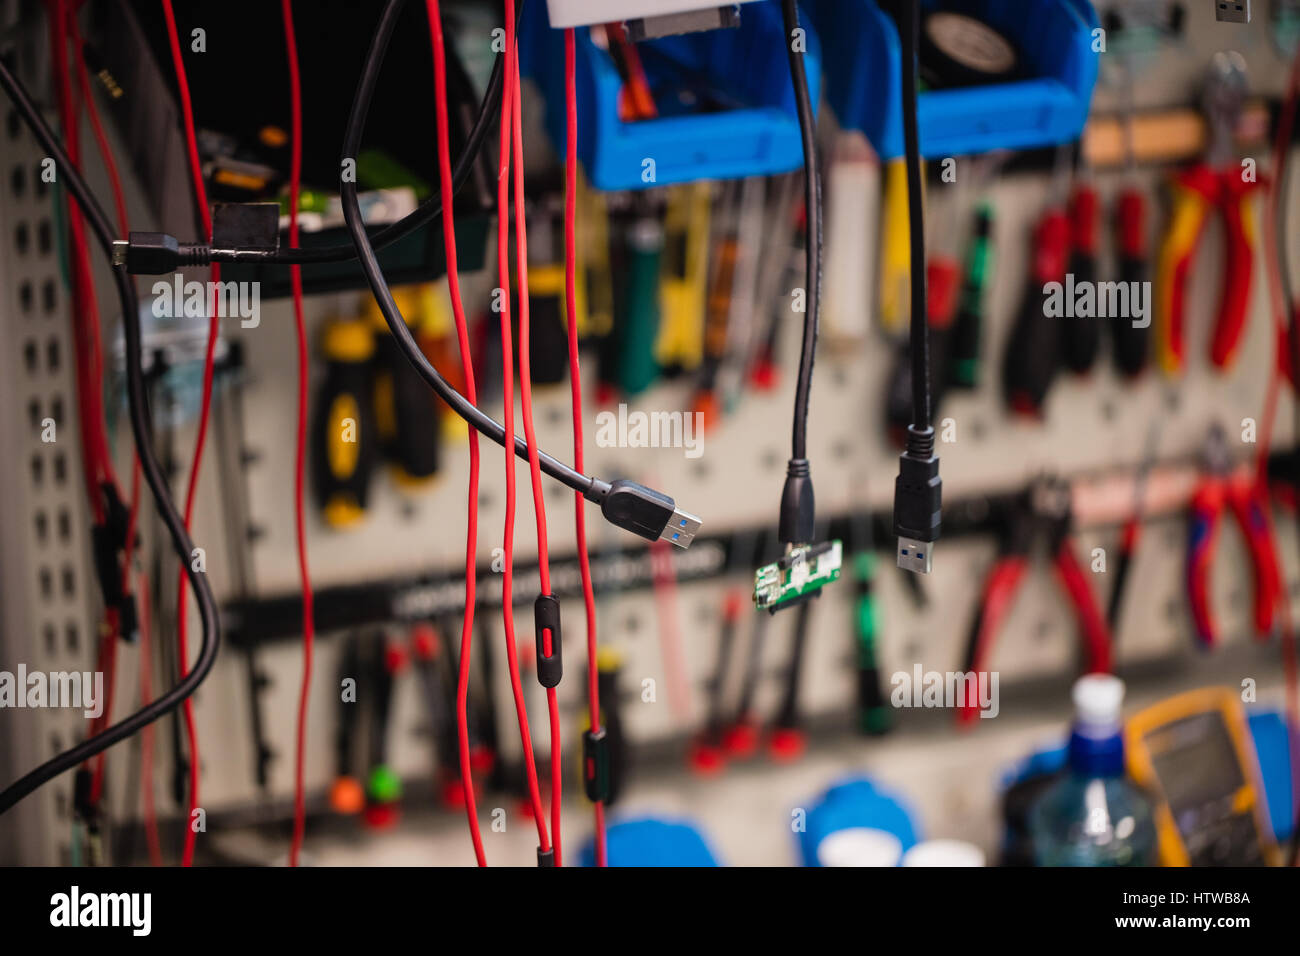 Data cables hanging in repair shop Stock Photo